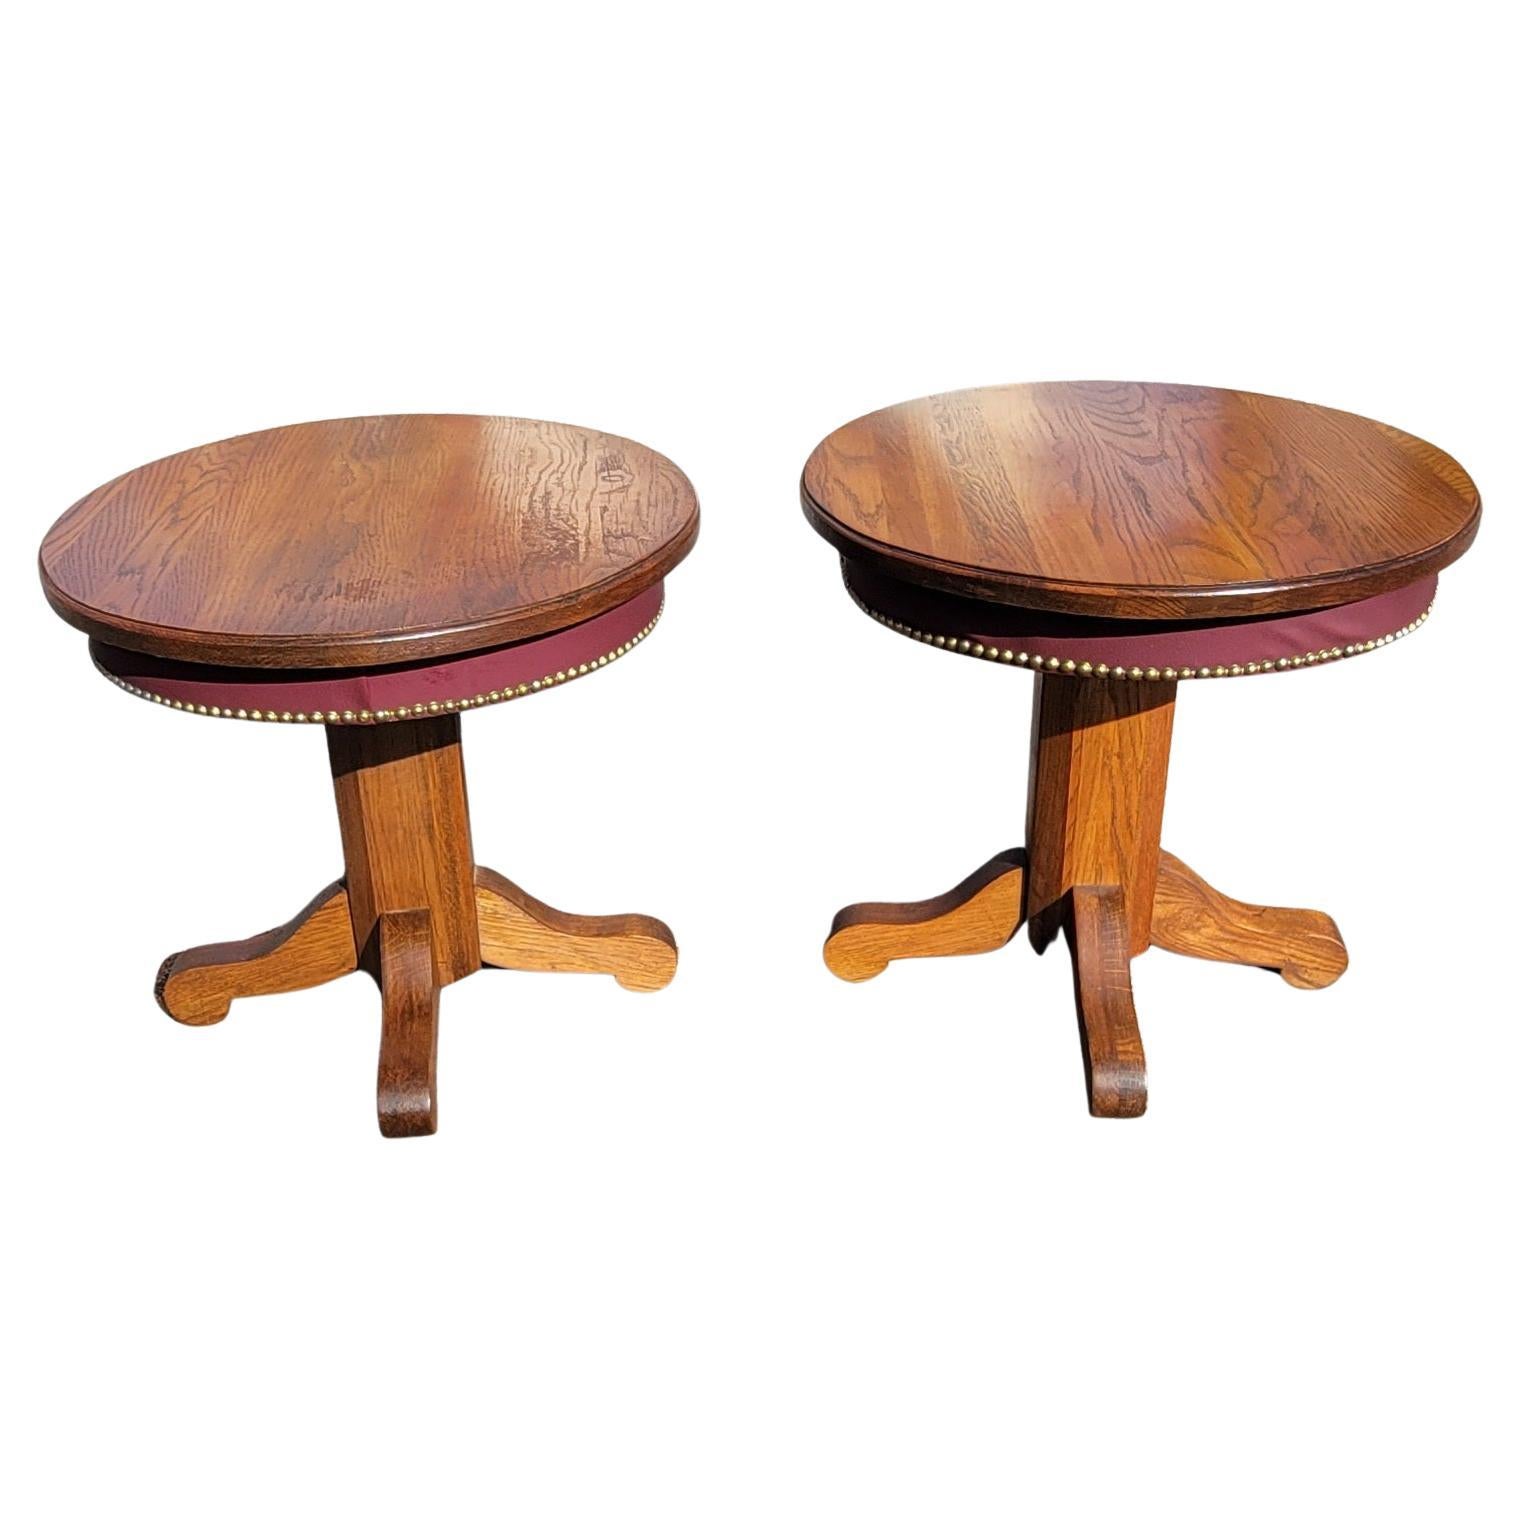 A pair of vintage American Amish mission oak pedestal oval side tables with nail trim over Leatherette apron. Beautifully handcrafted in the USA. Very good vintage condition. Newer leatherette apron with nail trim. Matching cocktail table / coffee